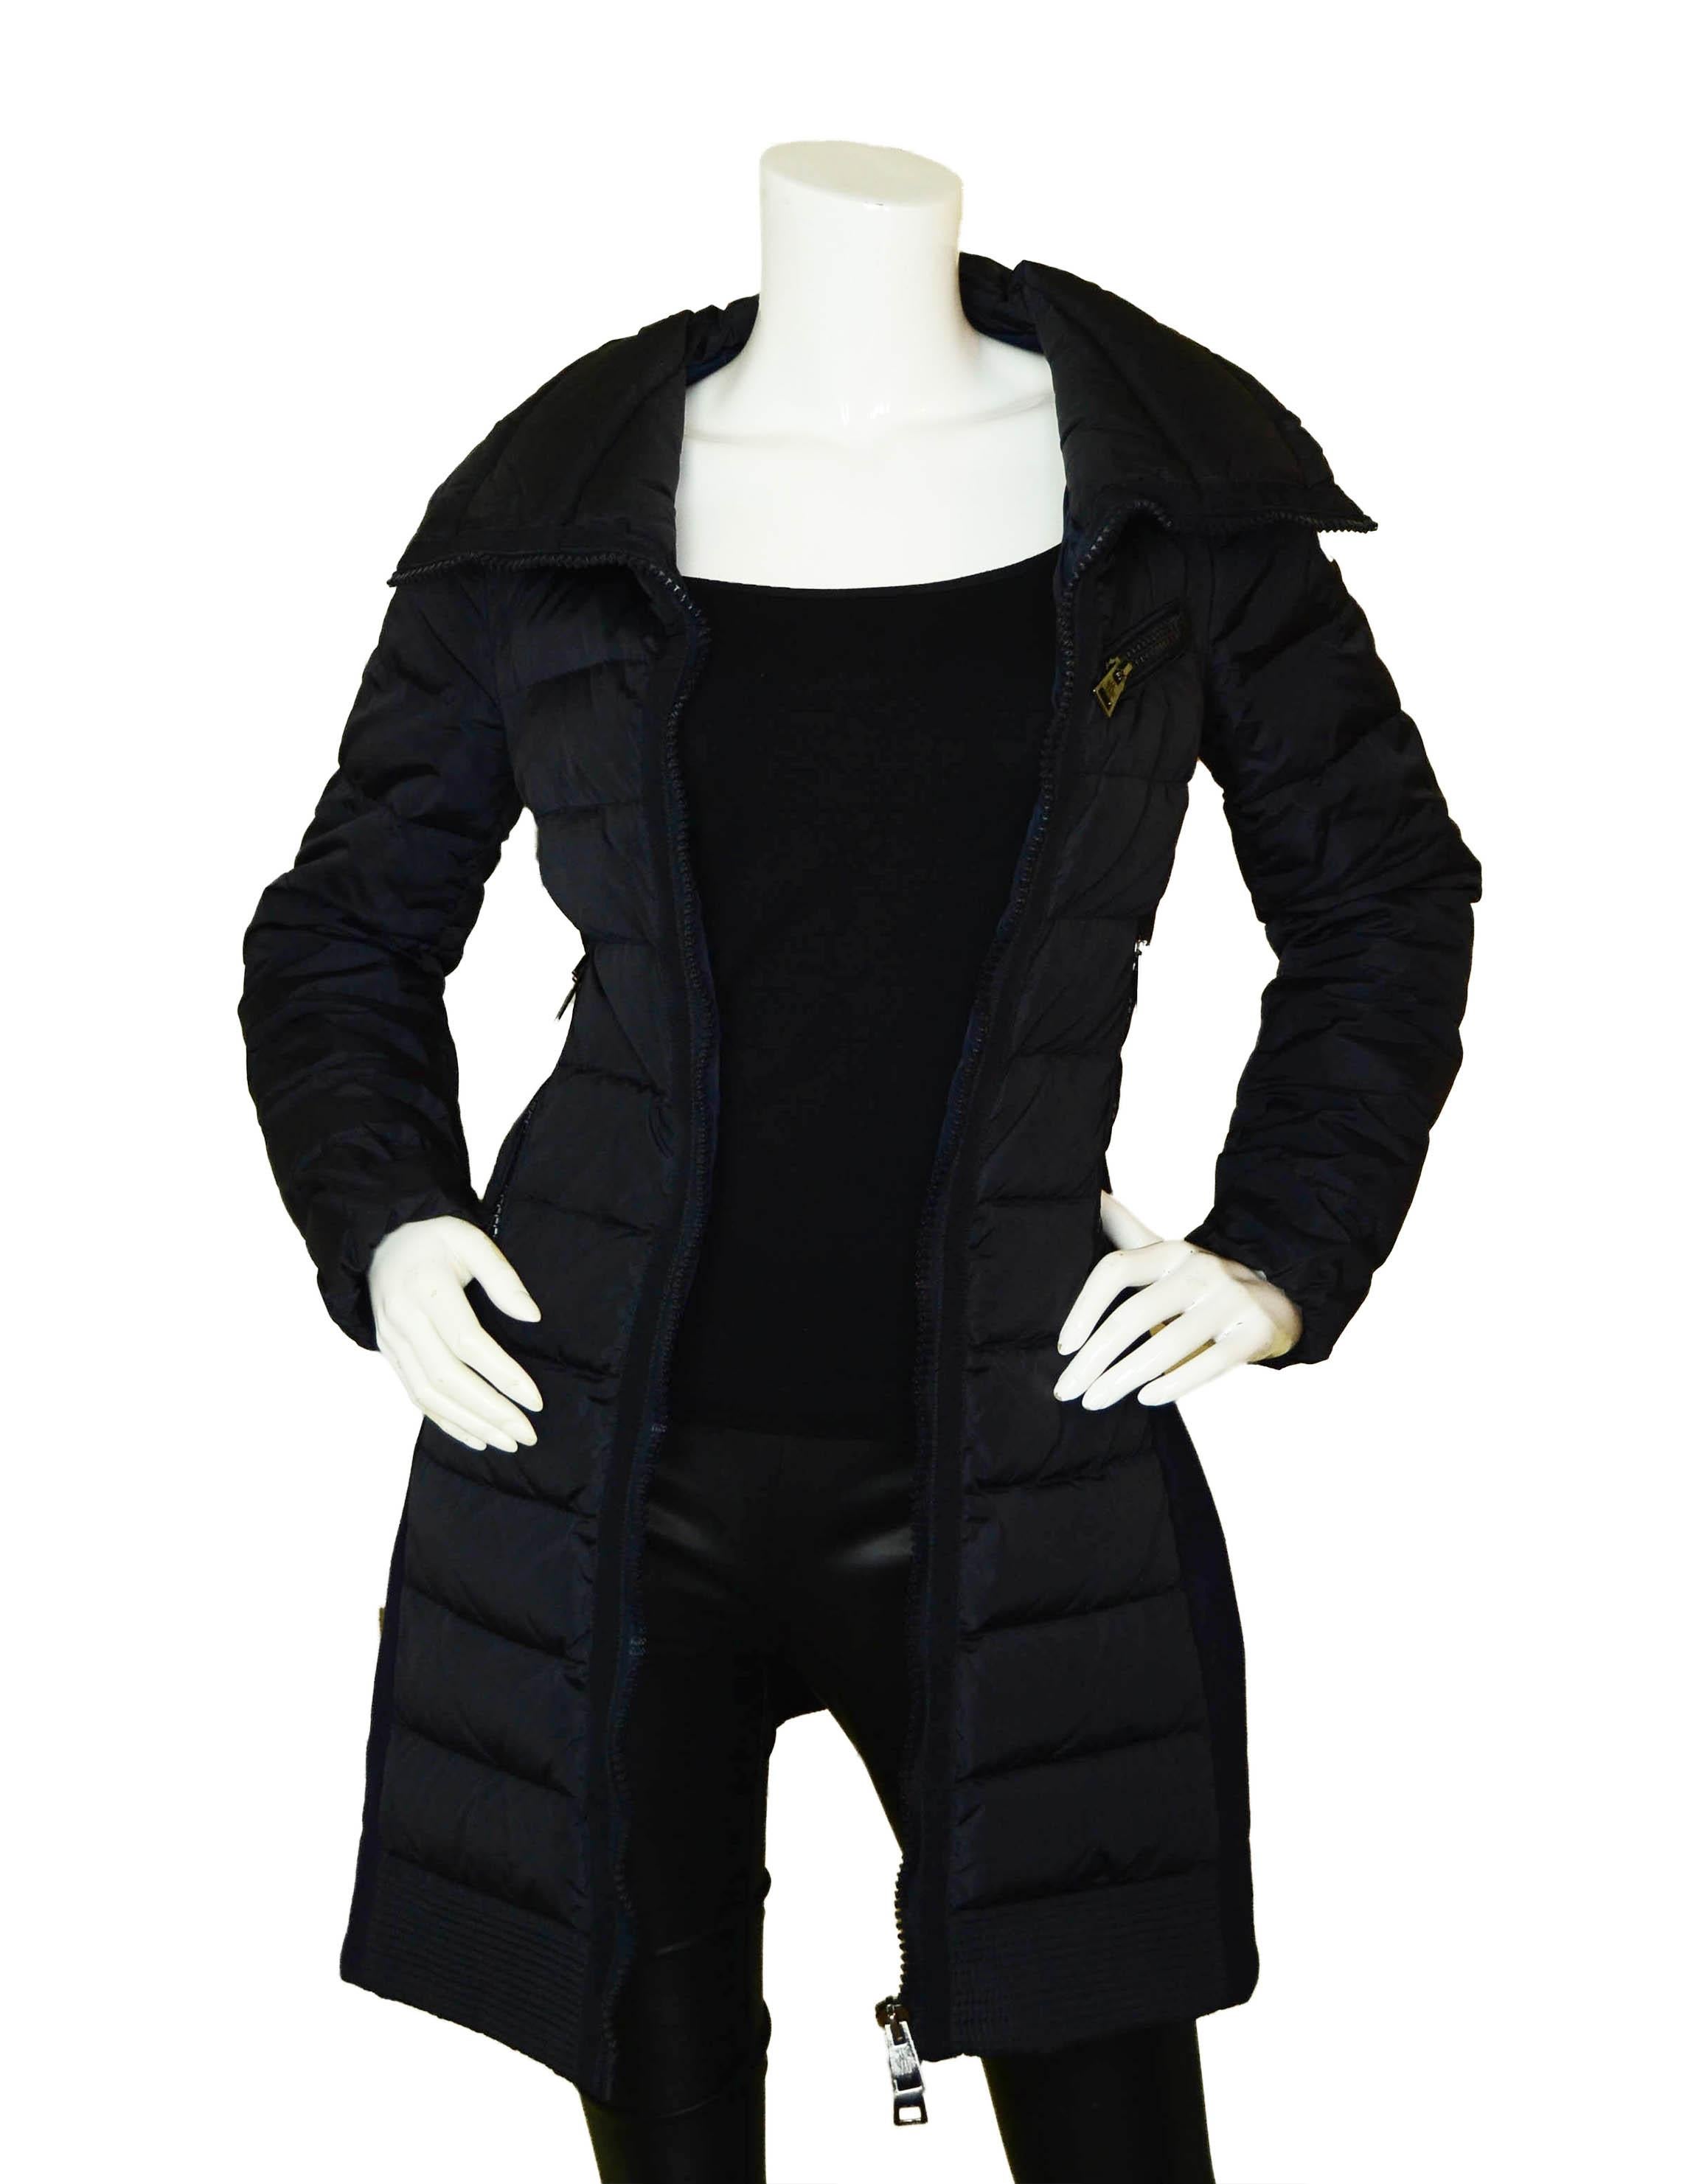 Moncler Herisse Navy Down Puffer Coat w/Knit Inserts

Made In: Bulgaria
Color: Navy
Materials: 100% Polyamide/100% Wool inserts
Lining: Nylon
Opening/Closure: 2-Way zipper
Overall Condition: Excellent

Tag Size: Designer 00/ US XXS *Please refer to